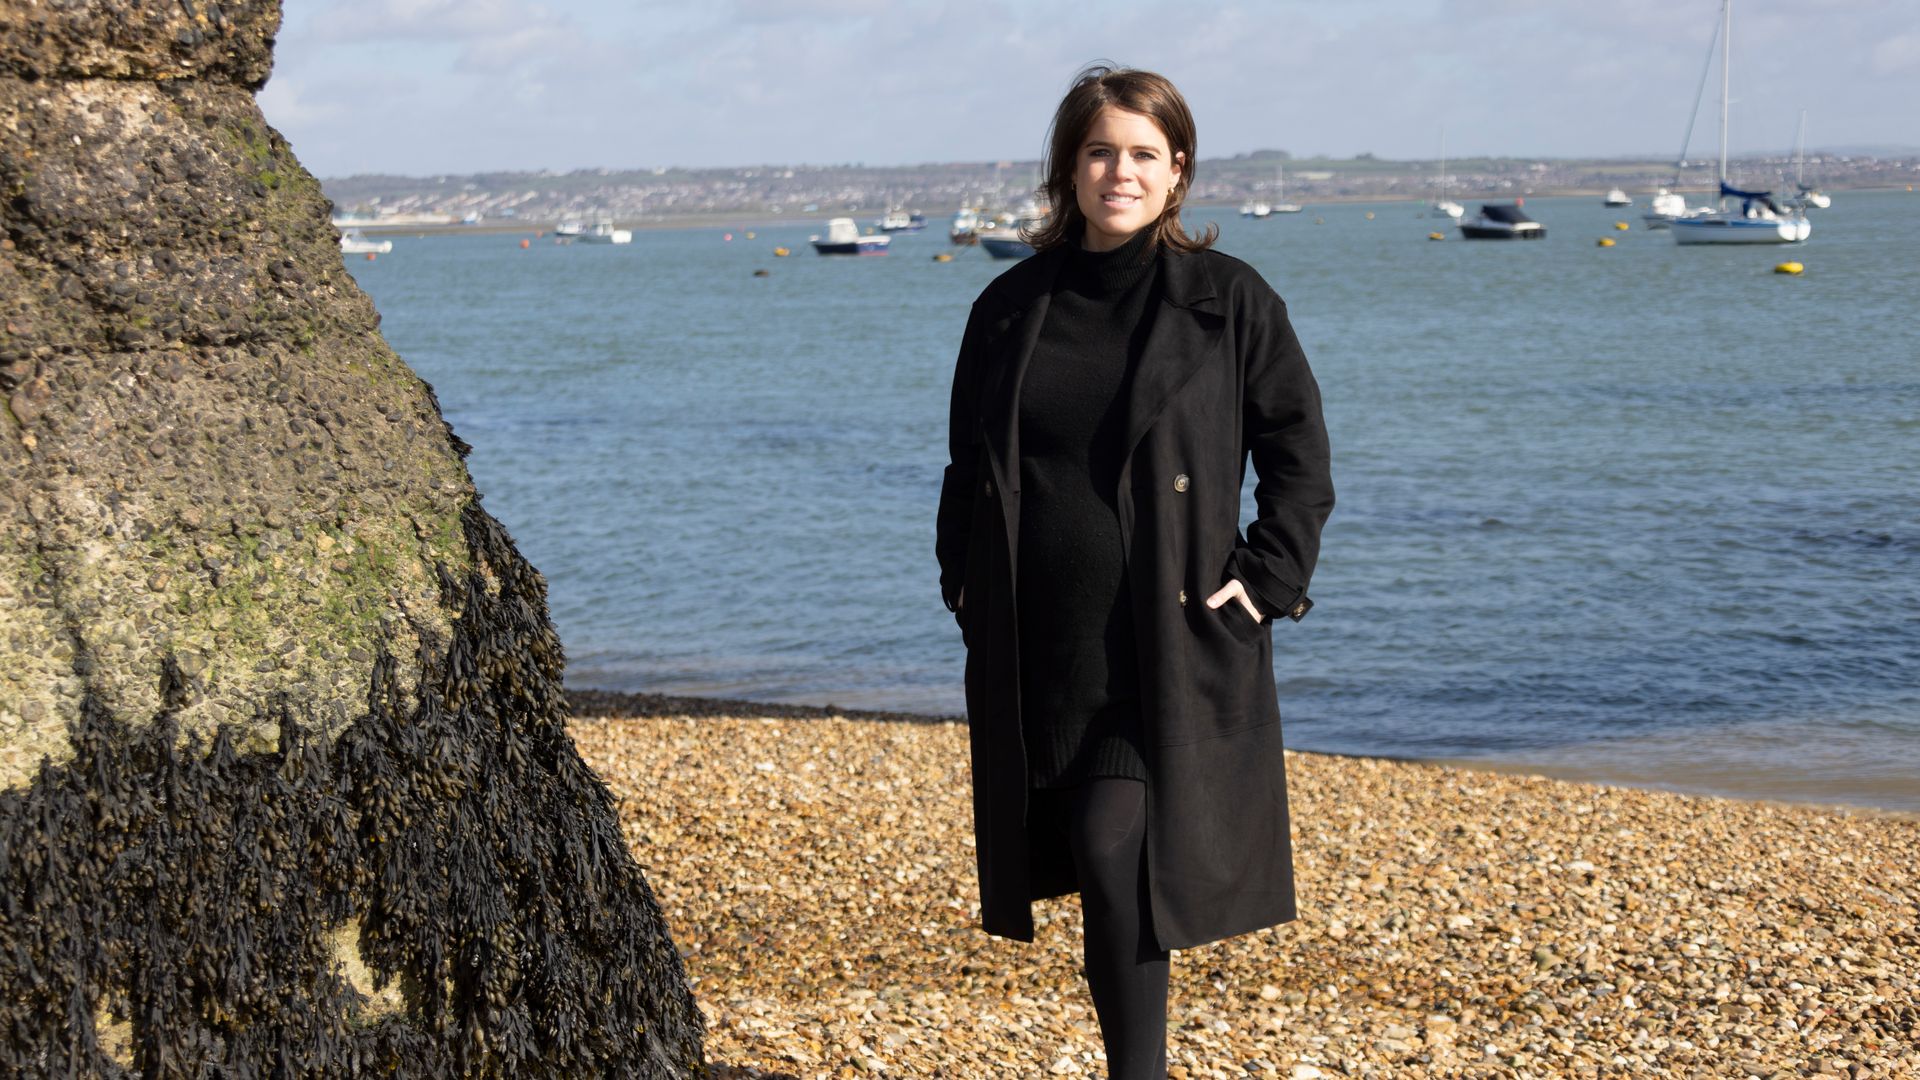 Princess Eugenie invited HELLO! to see her work with the Blue Marine Foundation